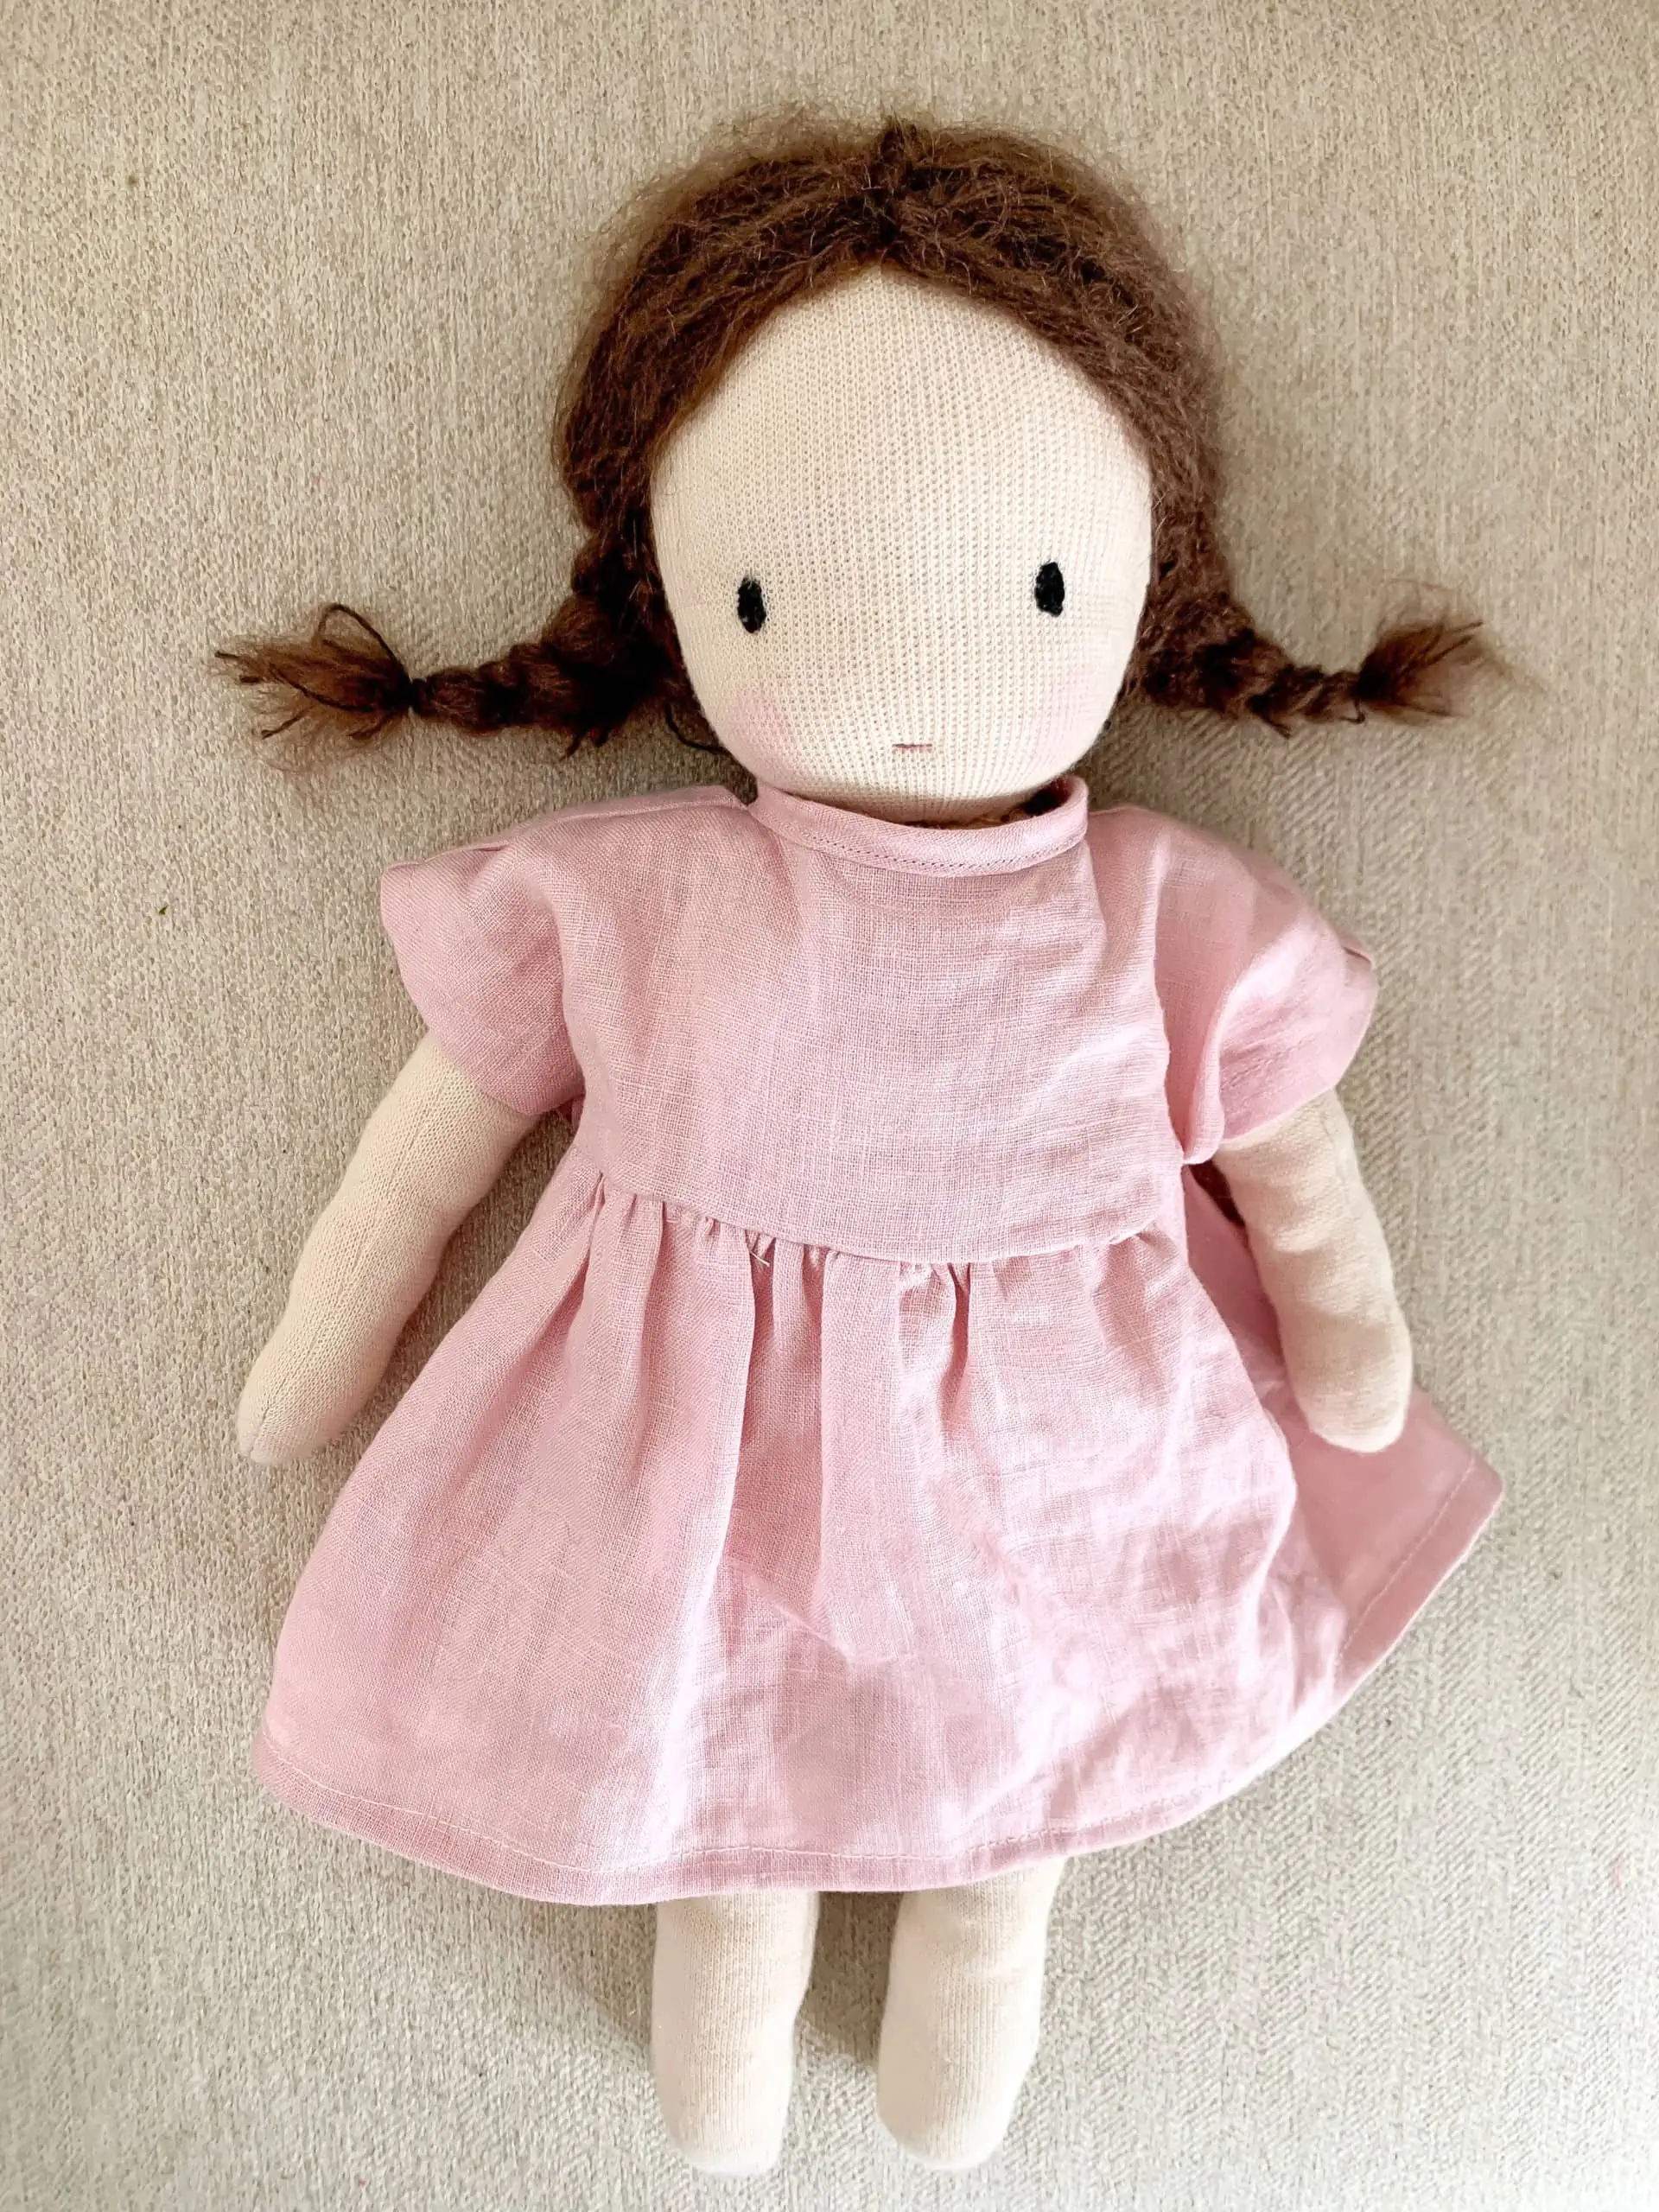 A waldorf-inspired handsewn doll wearing a pink linen dress. The doll has brown braids, pink cheeks, simple features, and is on a beige background.